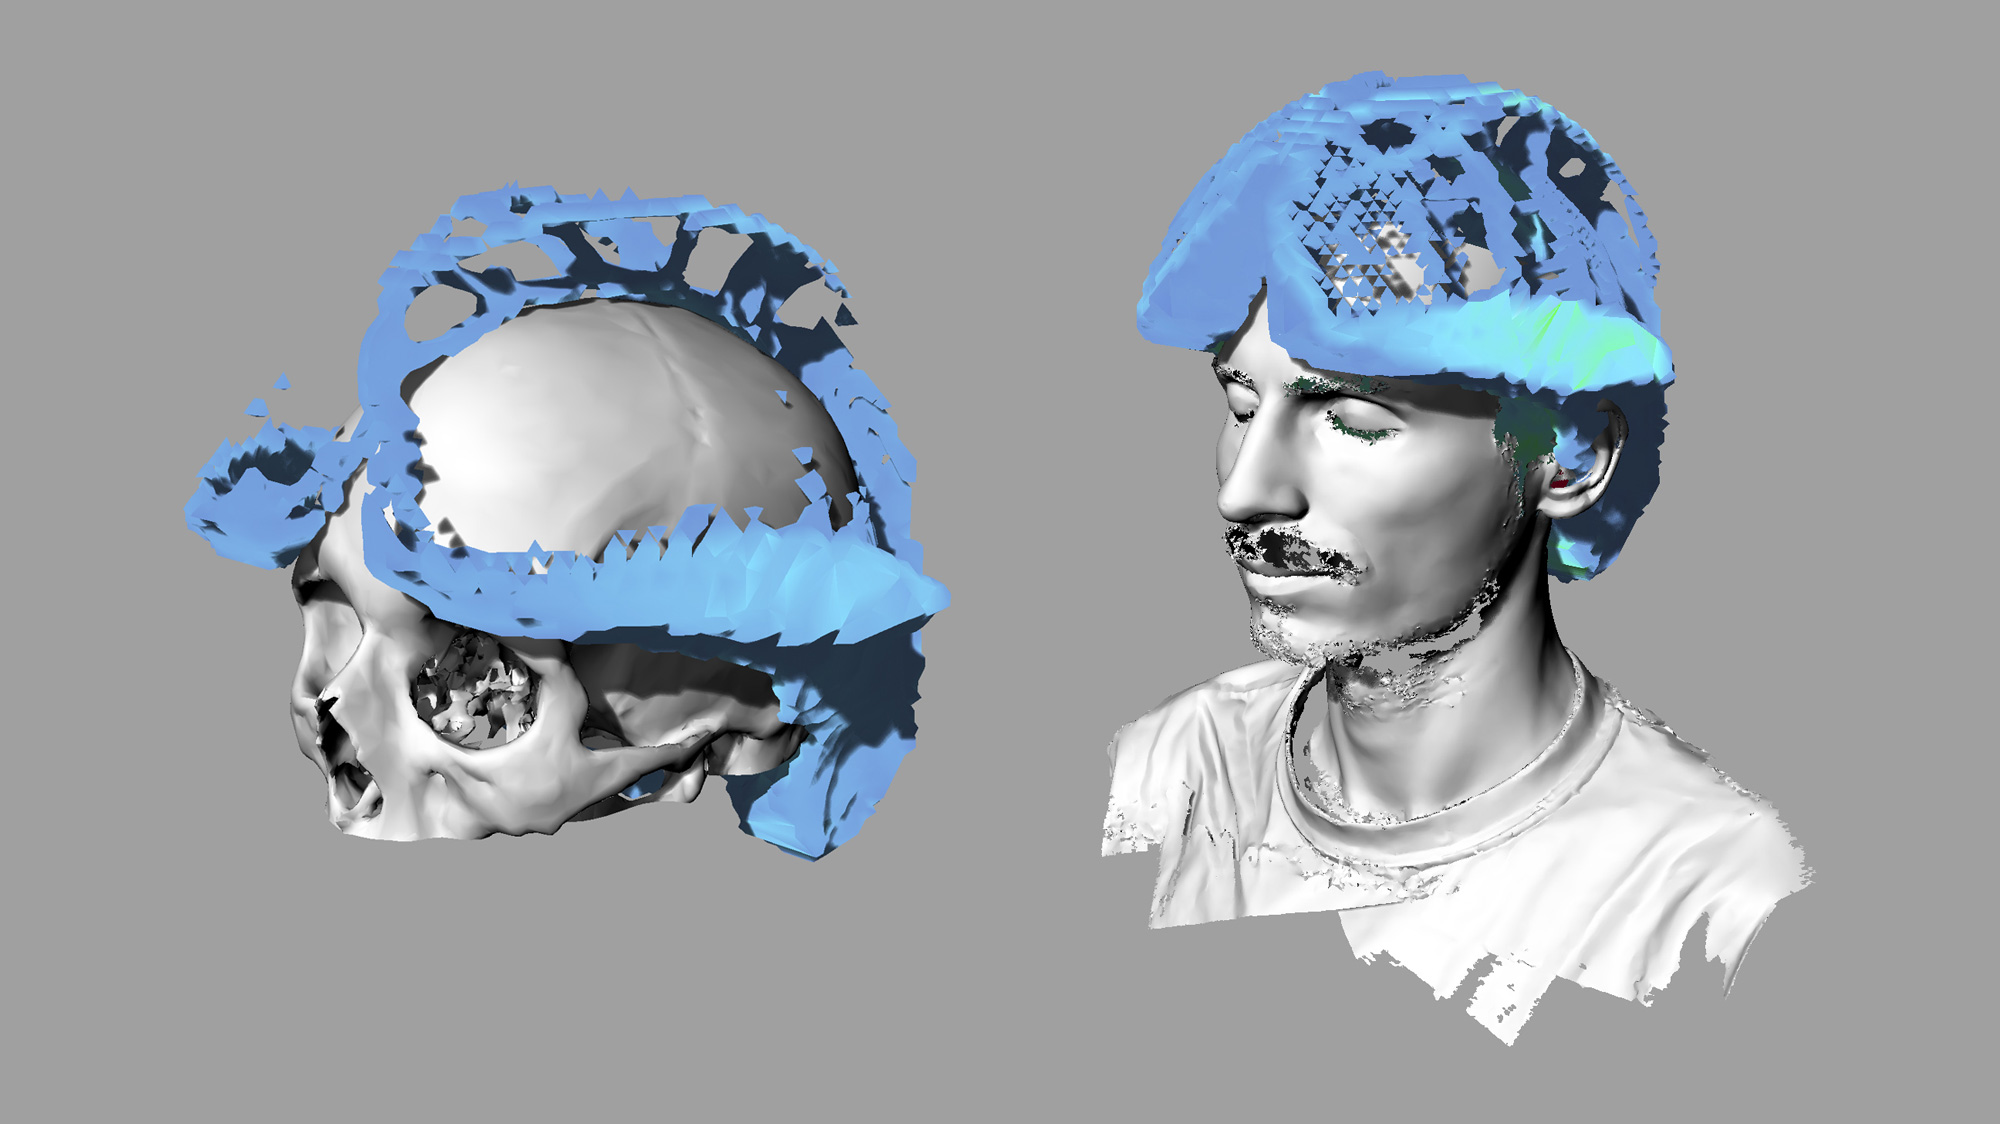 examples for the 3d software results (photo: Ronny Haberer)